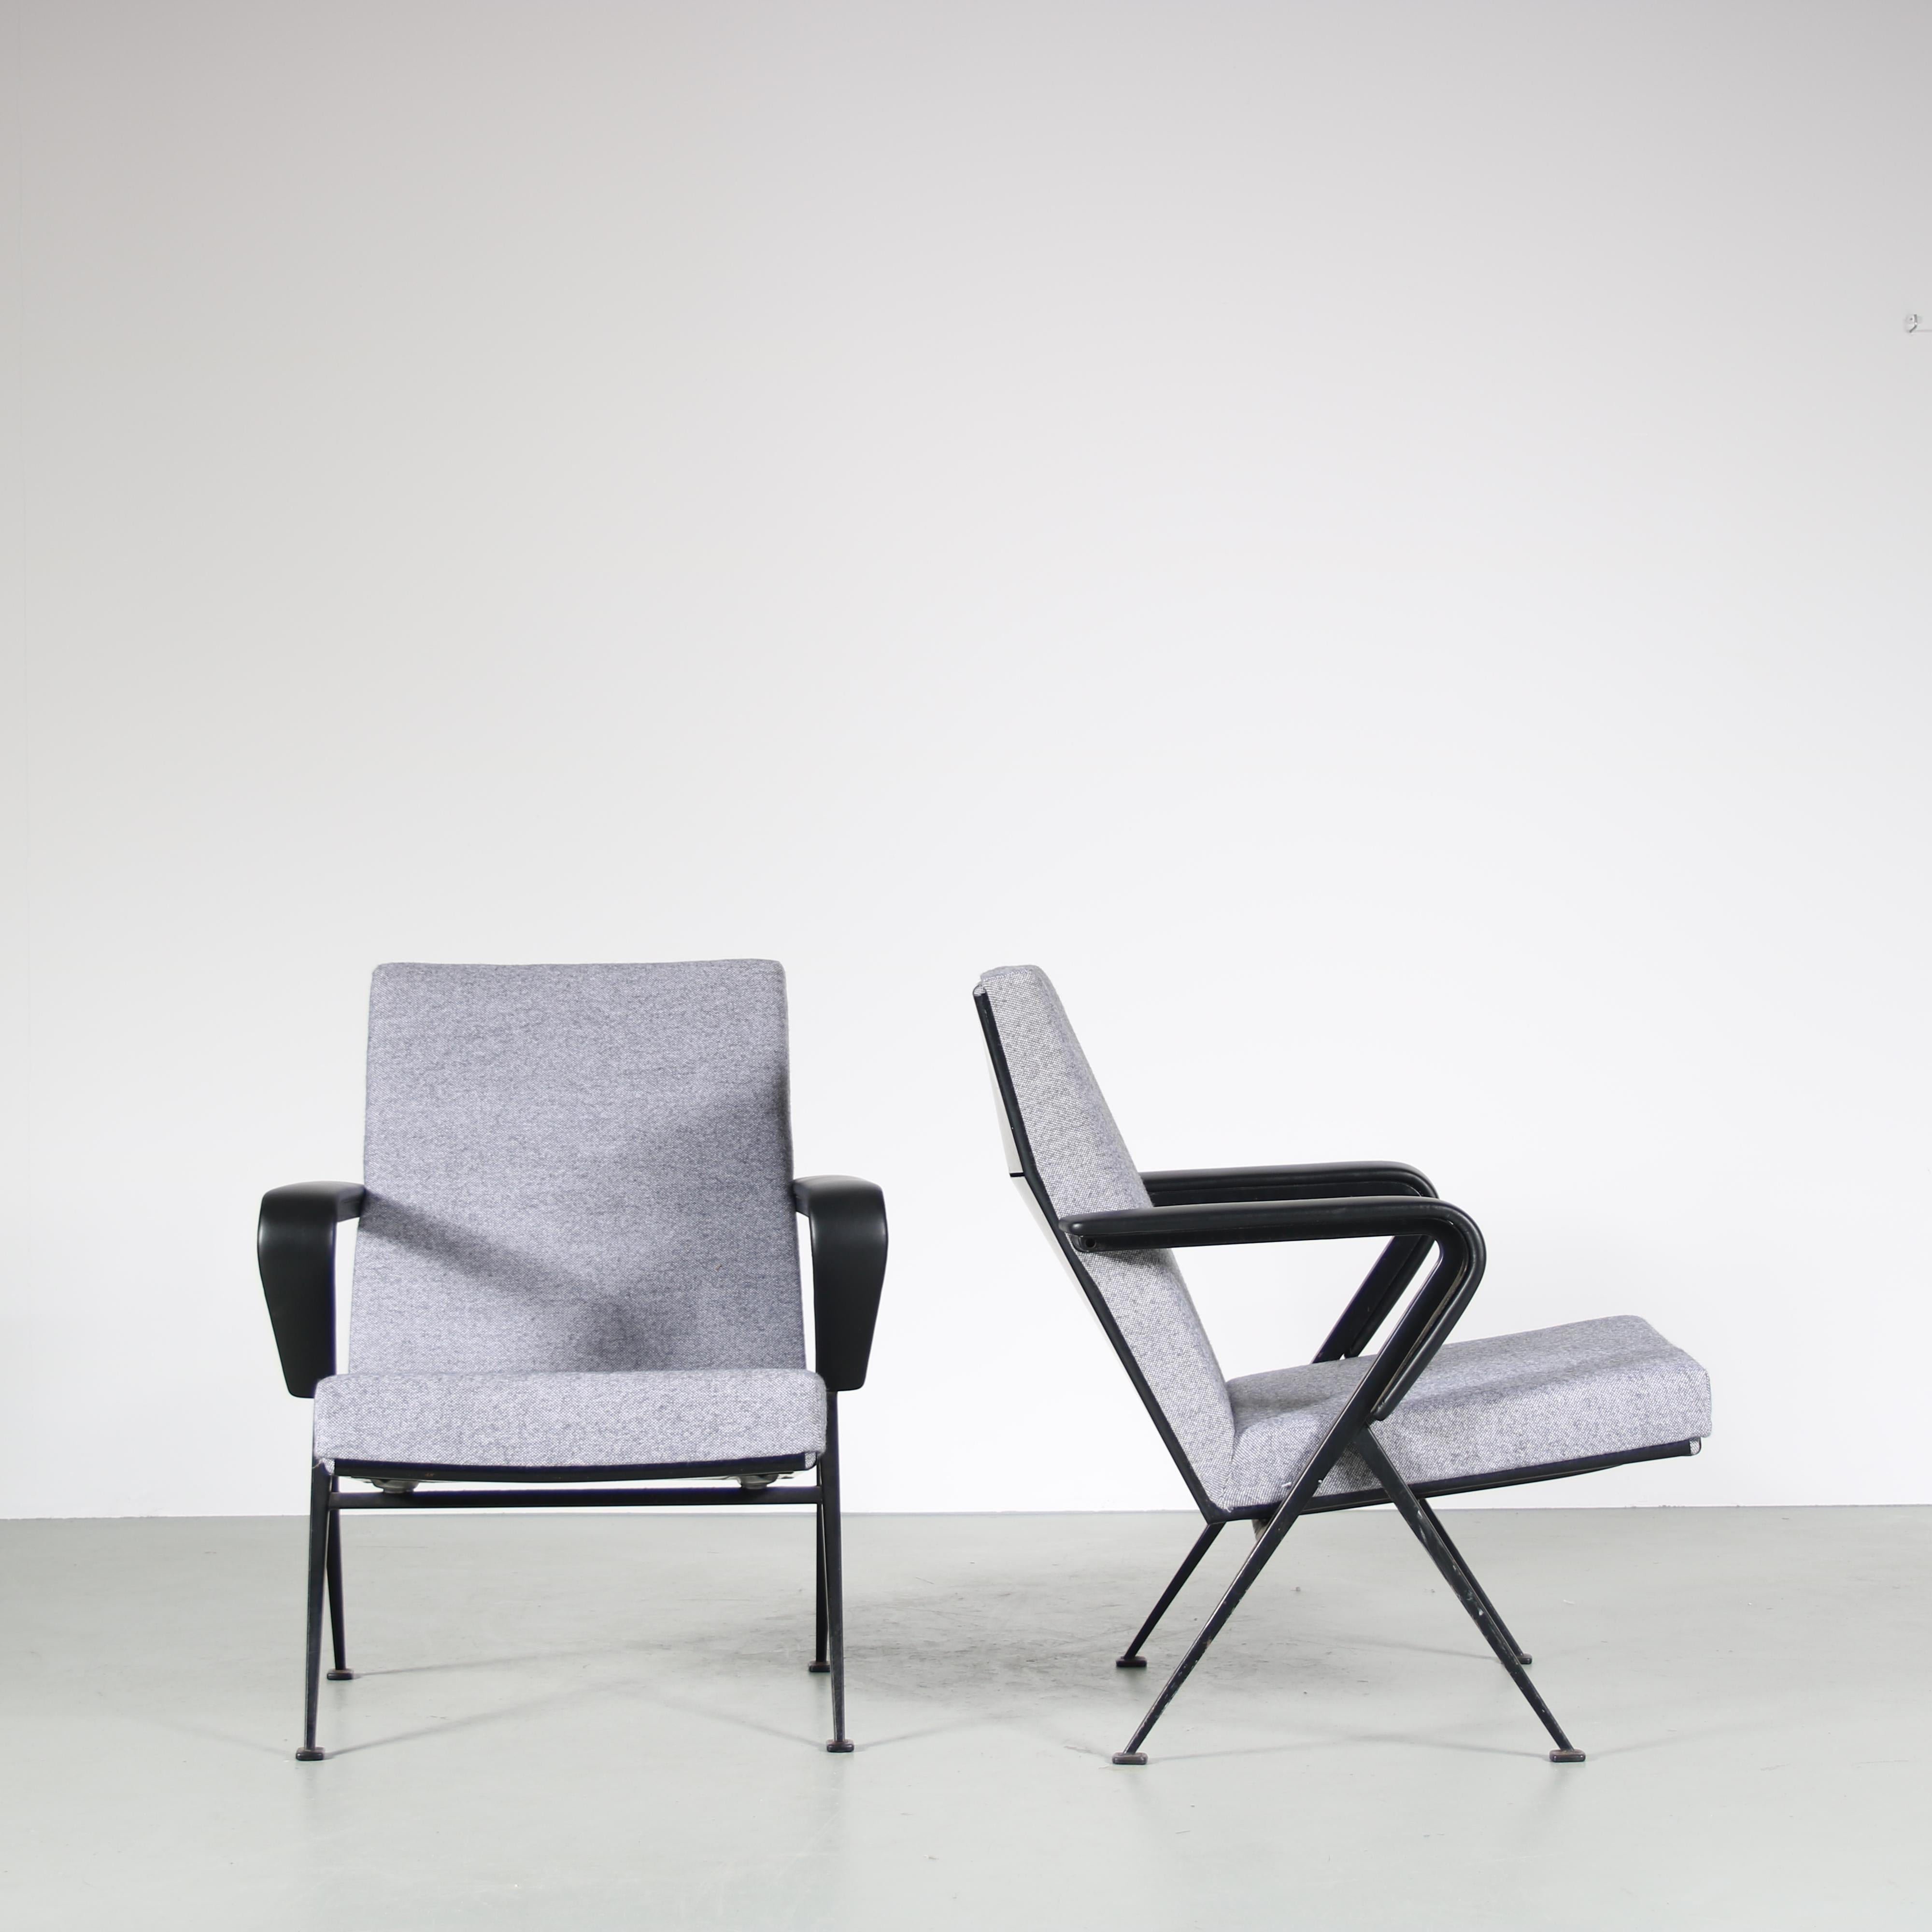 Mid-20th Century 1960s Pair of “Repose” Chairs by Friso Kramer for Ahrend de Cirkel, Netherlands For Sale